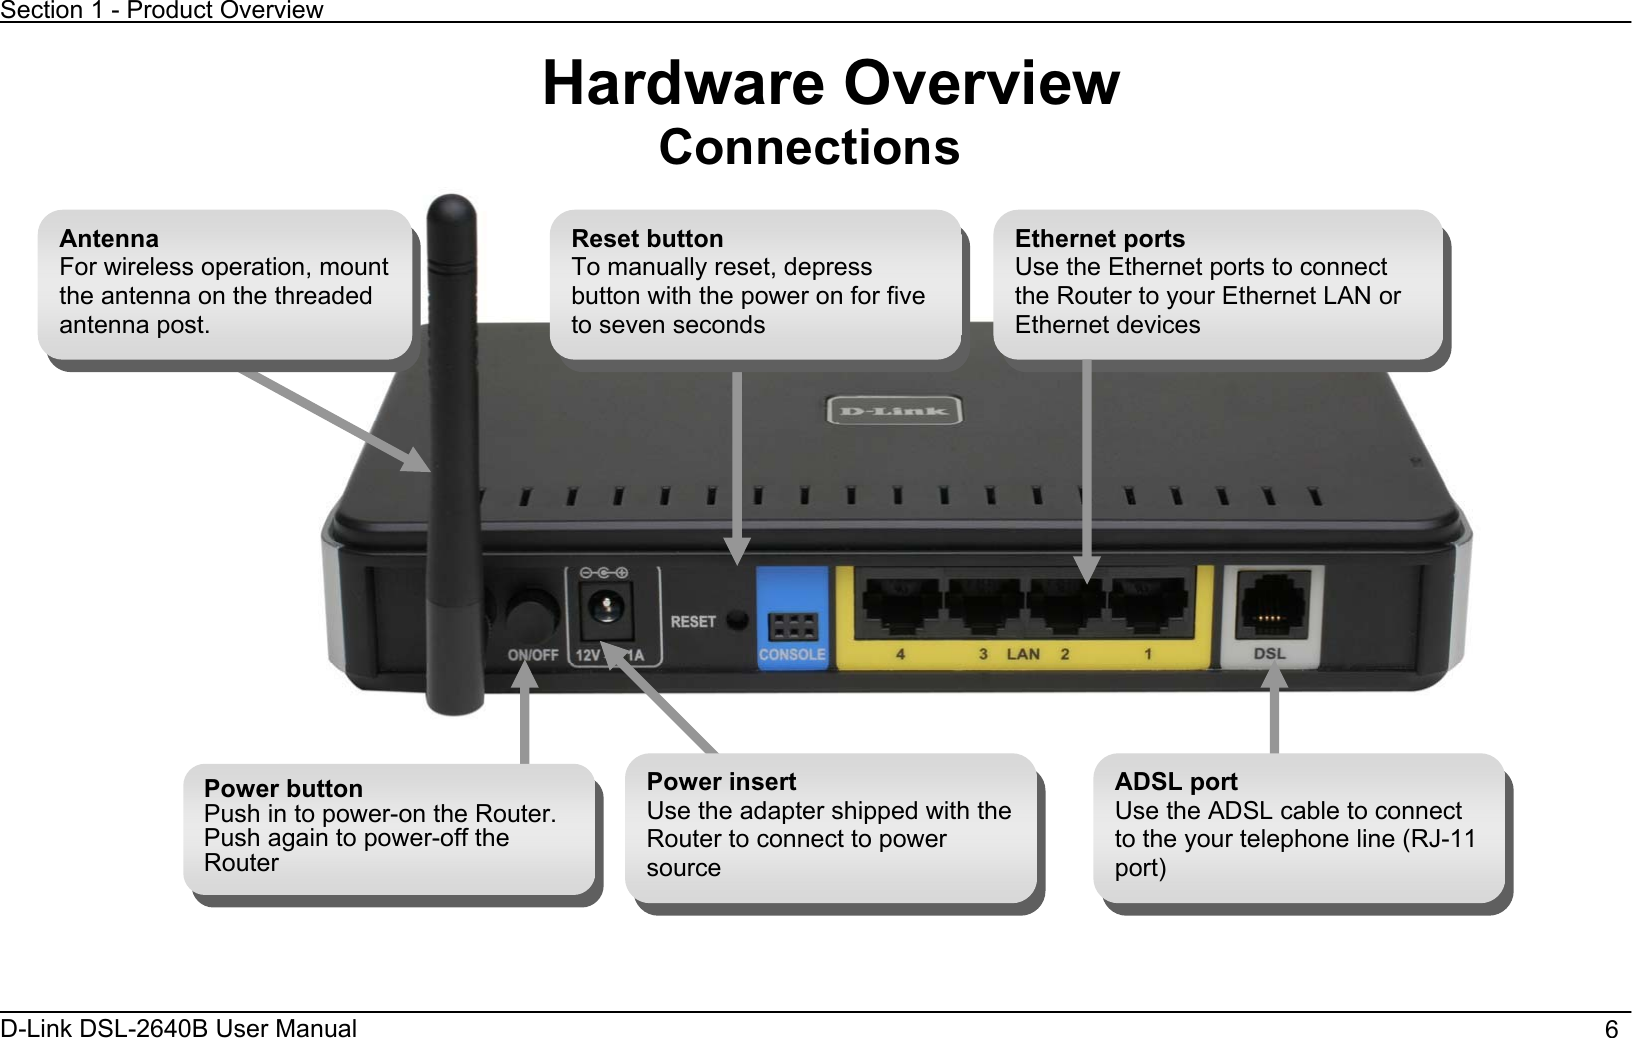 Section 1 - Product OverviewD-Link DSL-2640B User Manual                                       6Hardware Overview ConnectionsPower button Push in to power-on the Router. Push again to power-off the RouterEthernet ports Use the Ethernet ports to connect the Router to your Ethernet LAN or Ethernet devices Reset button To manually reset, depress button with the power on for five to seven seconds AntennaFor wireless operation, mount the antenna on the threaded antenna post. Power insert Use the adapter shipped with the Router to connect to power sourceADSL port Use the ADSL cable to connect to the your telephone line (RJ-11 port)